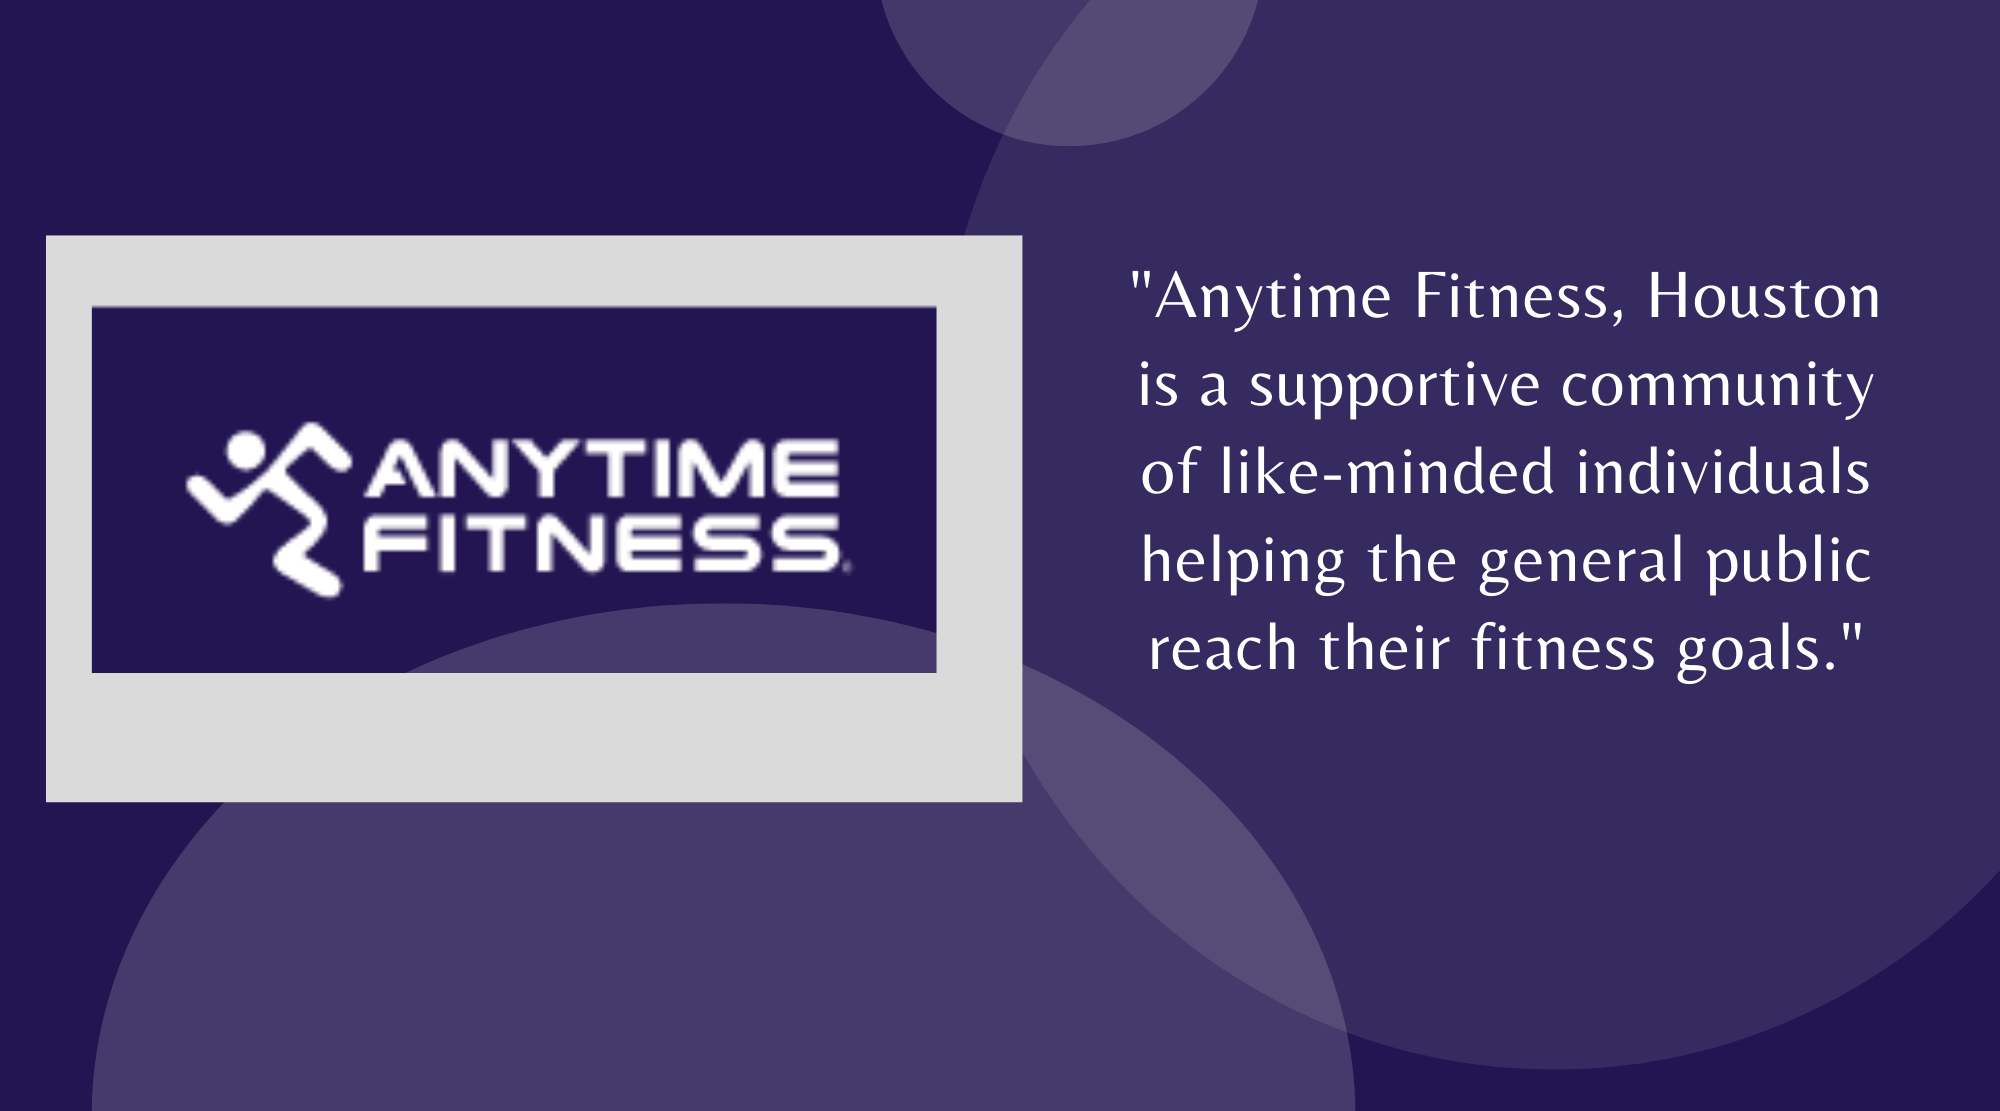 Anytime Fitness, Friday, August 5, 2022, Press release picture